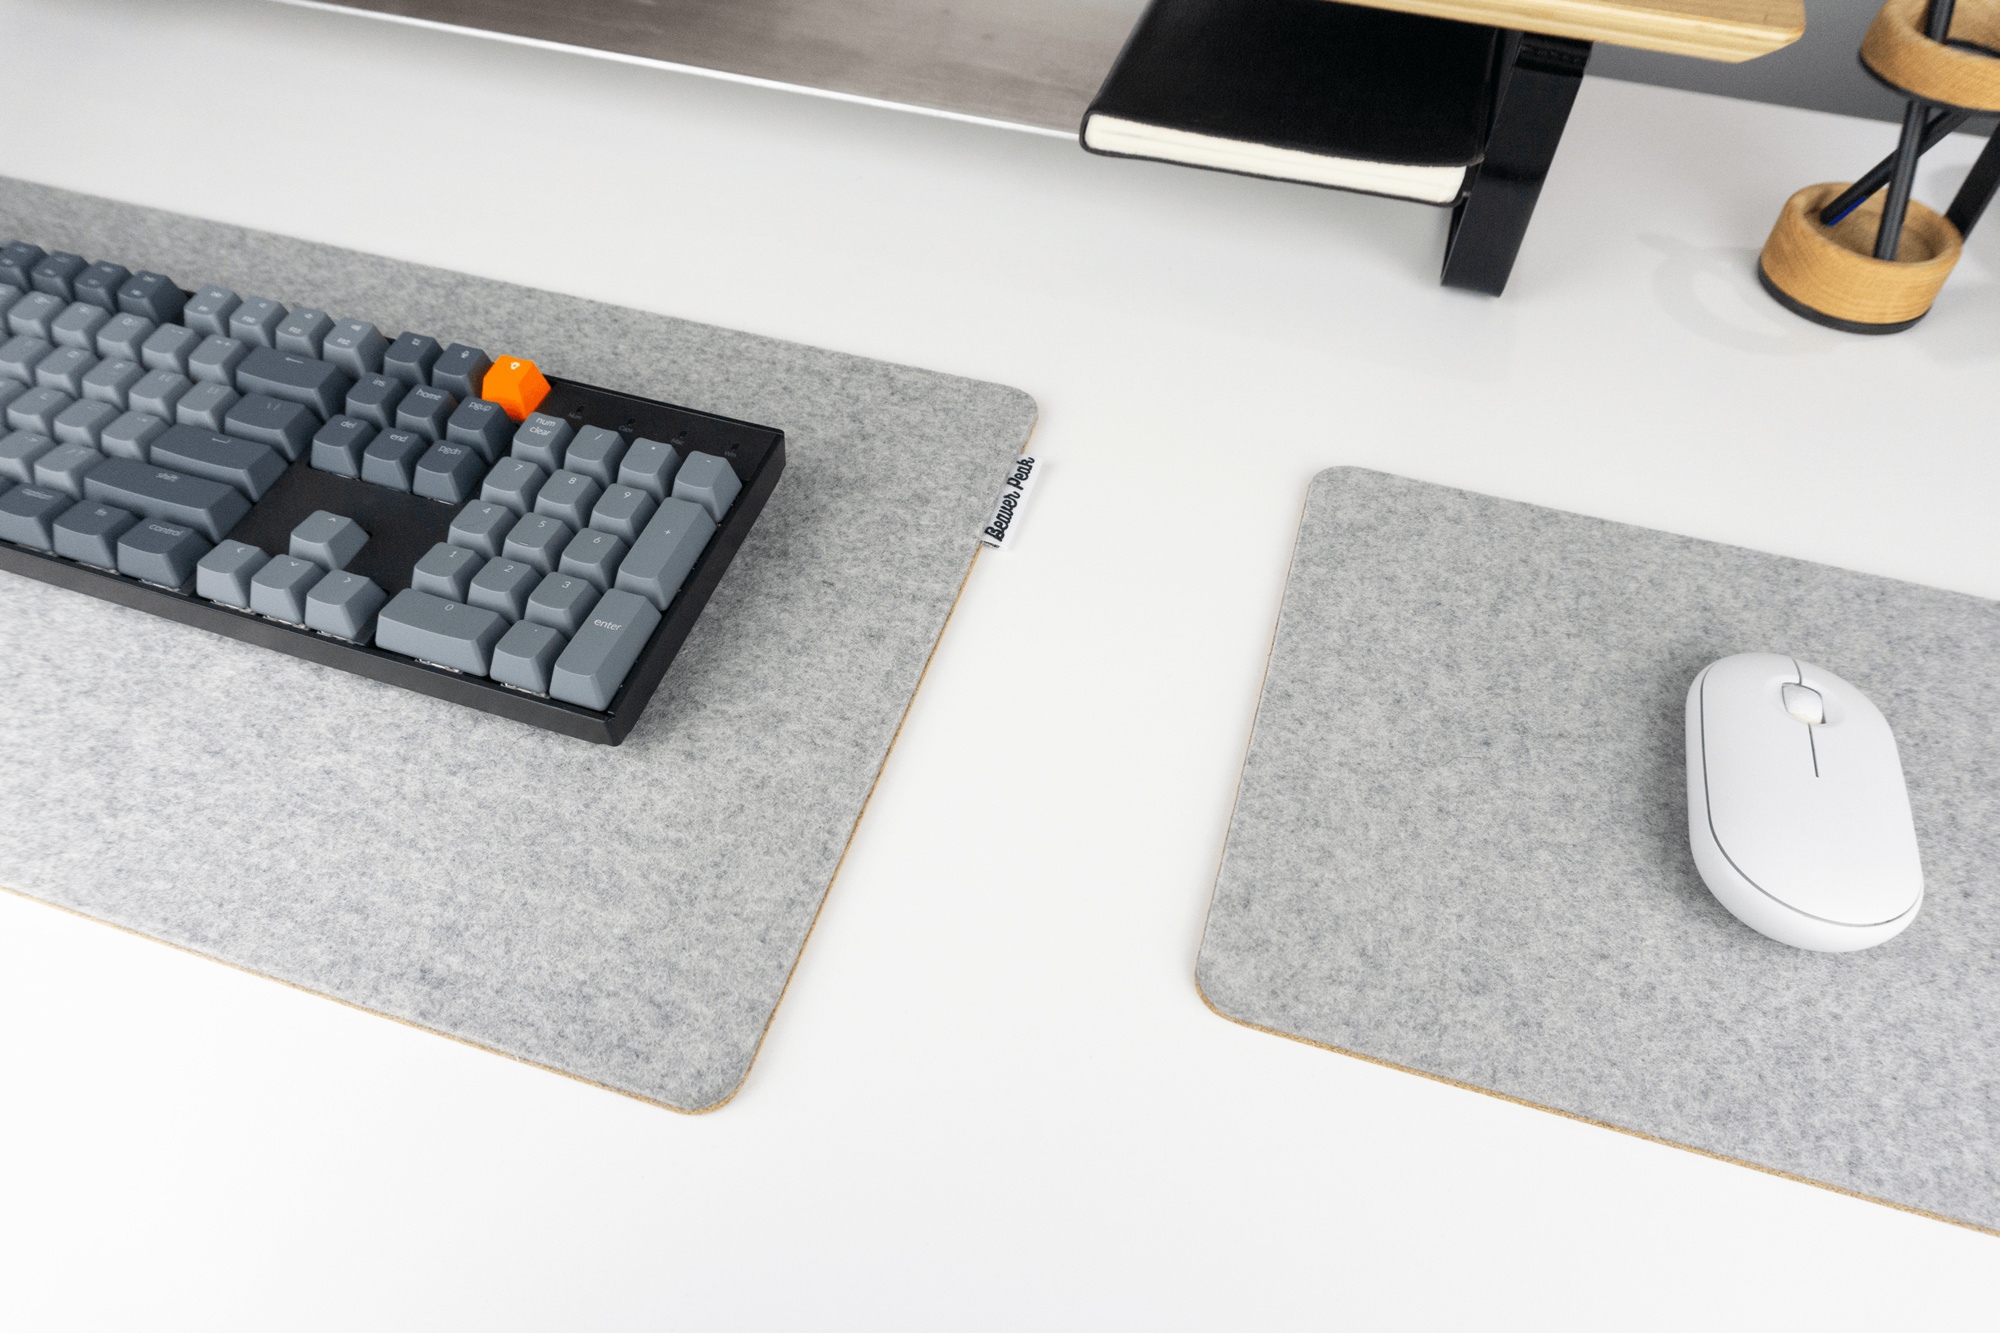 Grey BeaverPeak wool and cork desk pad with keyboard on top next to grey wool felt and cork mouse pad with white mouse on top. All resting on a white standing desk with an oak desk shelf in the background.